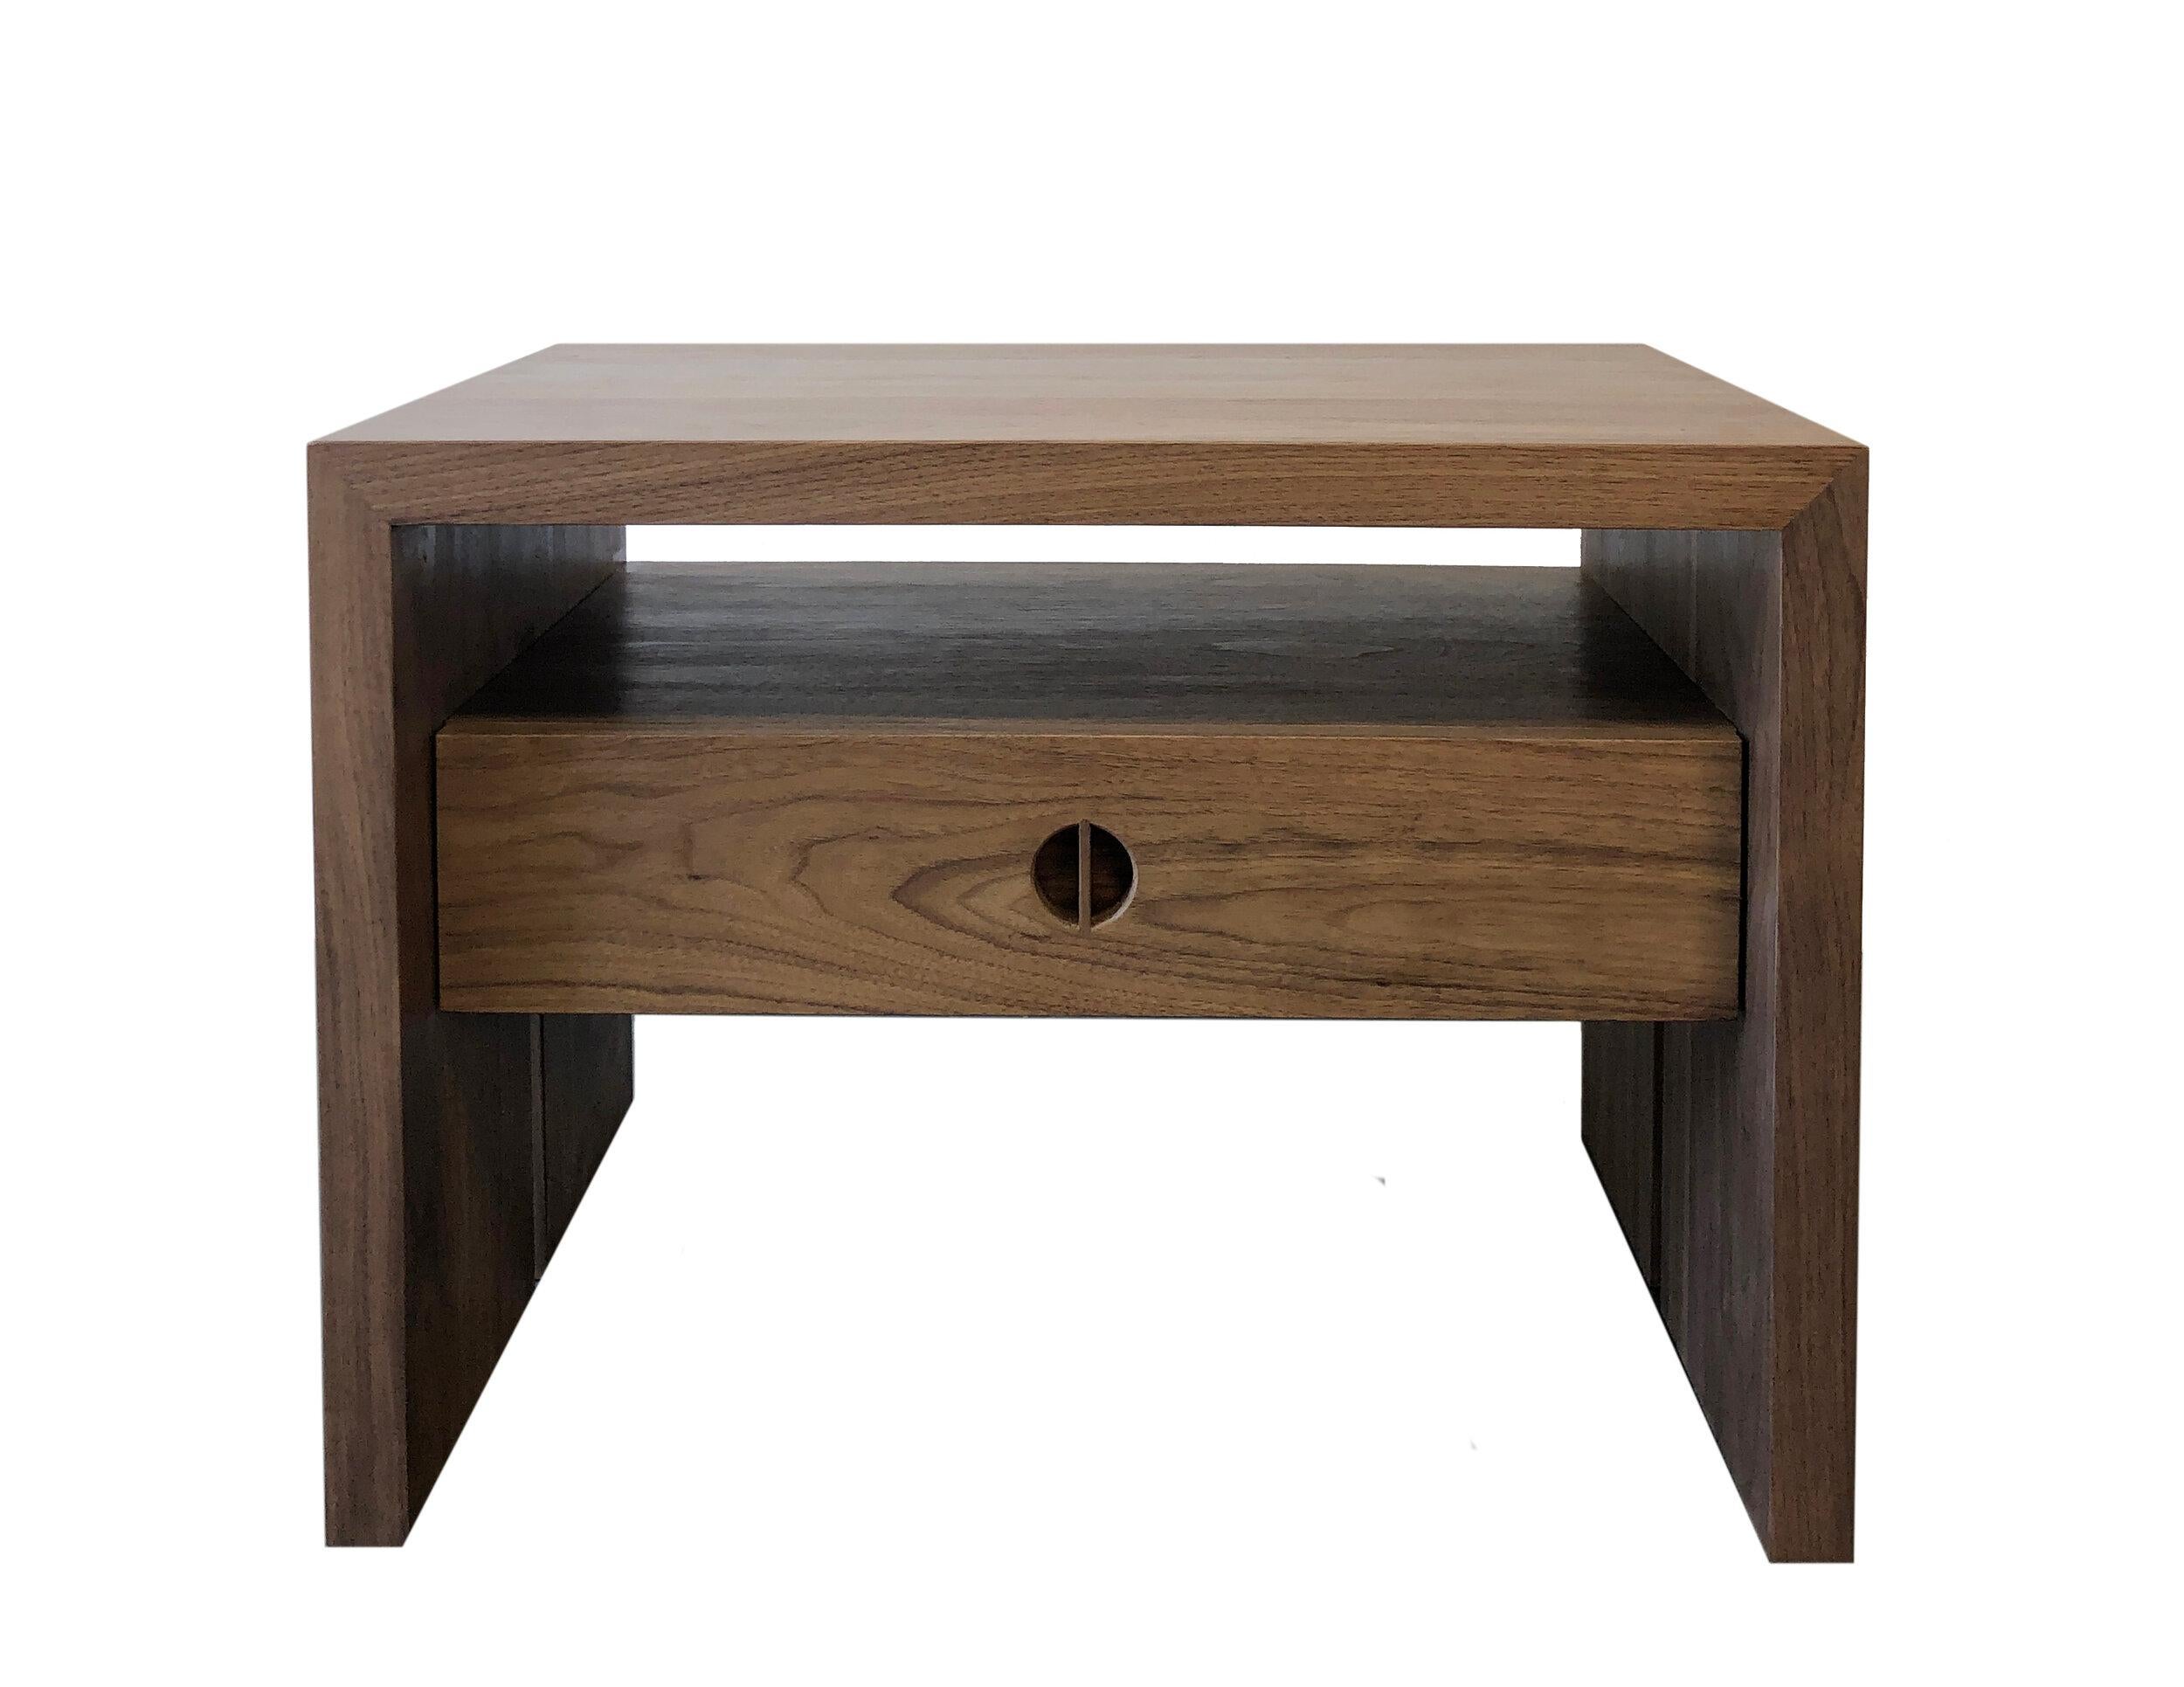 This custom nightstand with drawer is hand-made in the United States with all hardwood construction. Characterized by its striking waterfall design, unique split leg detail, and convenient and accessible storage drawer, the minimalist Jameson